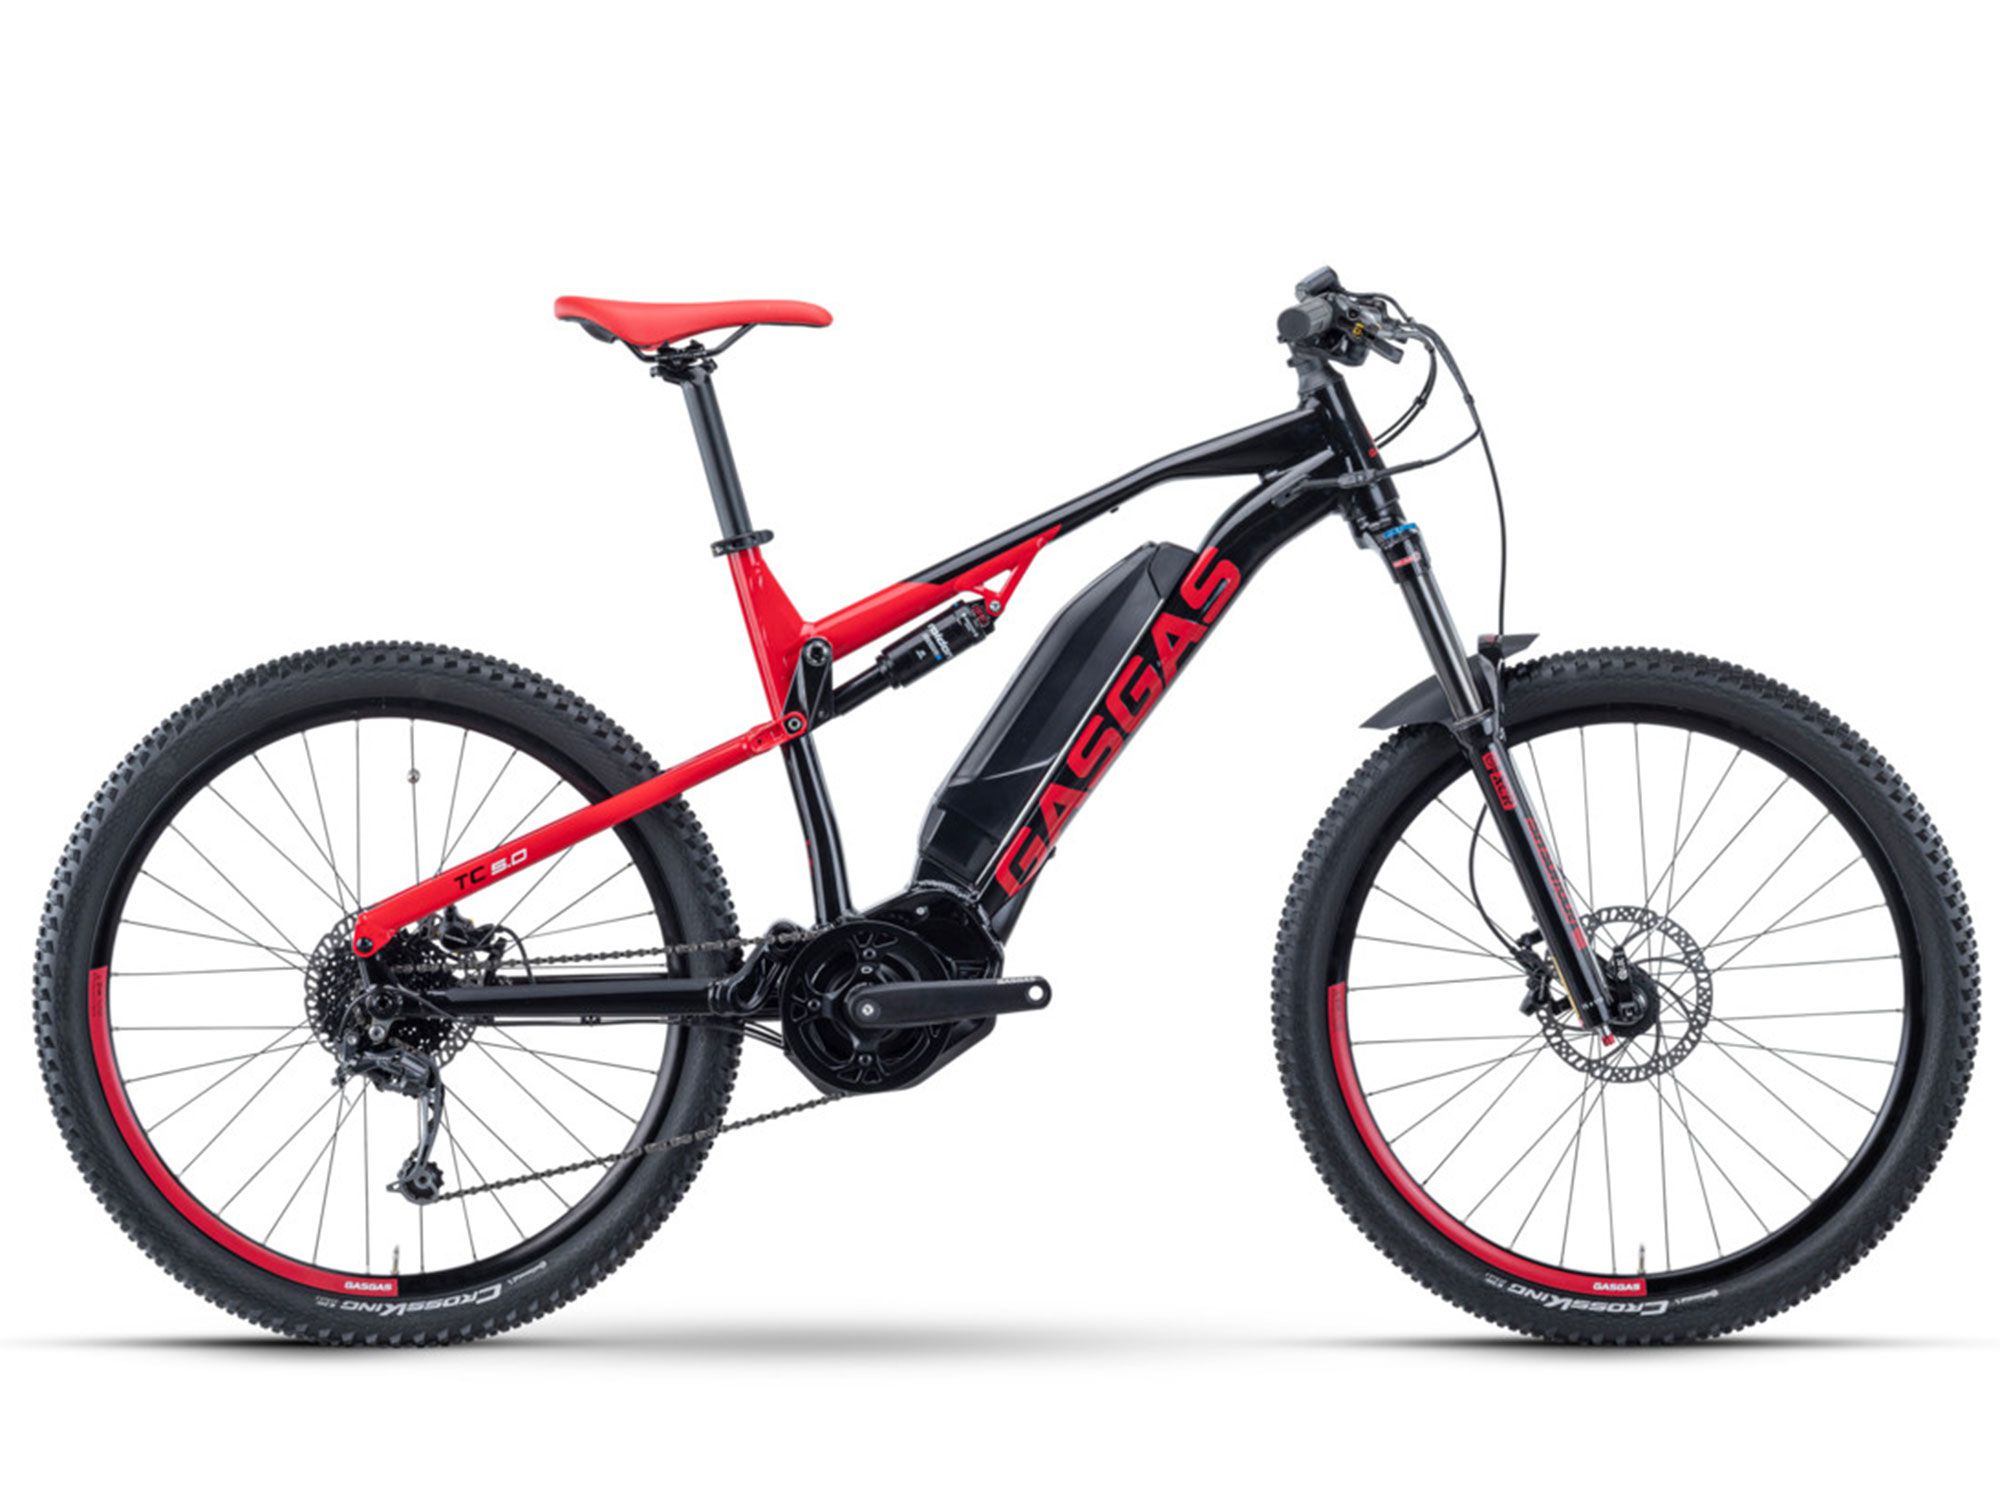 The Trail Cross 5.0 is an affordable all-rounder.